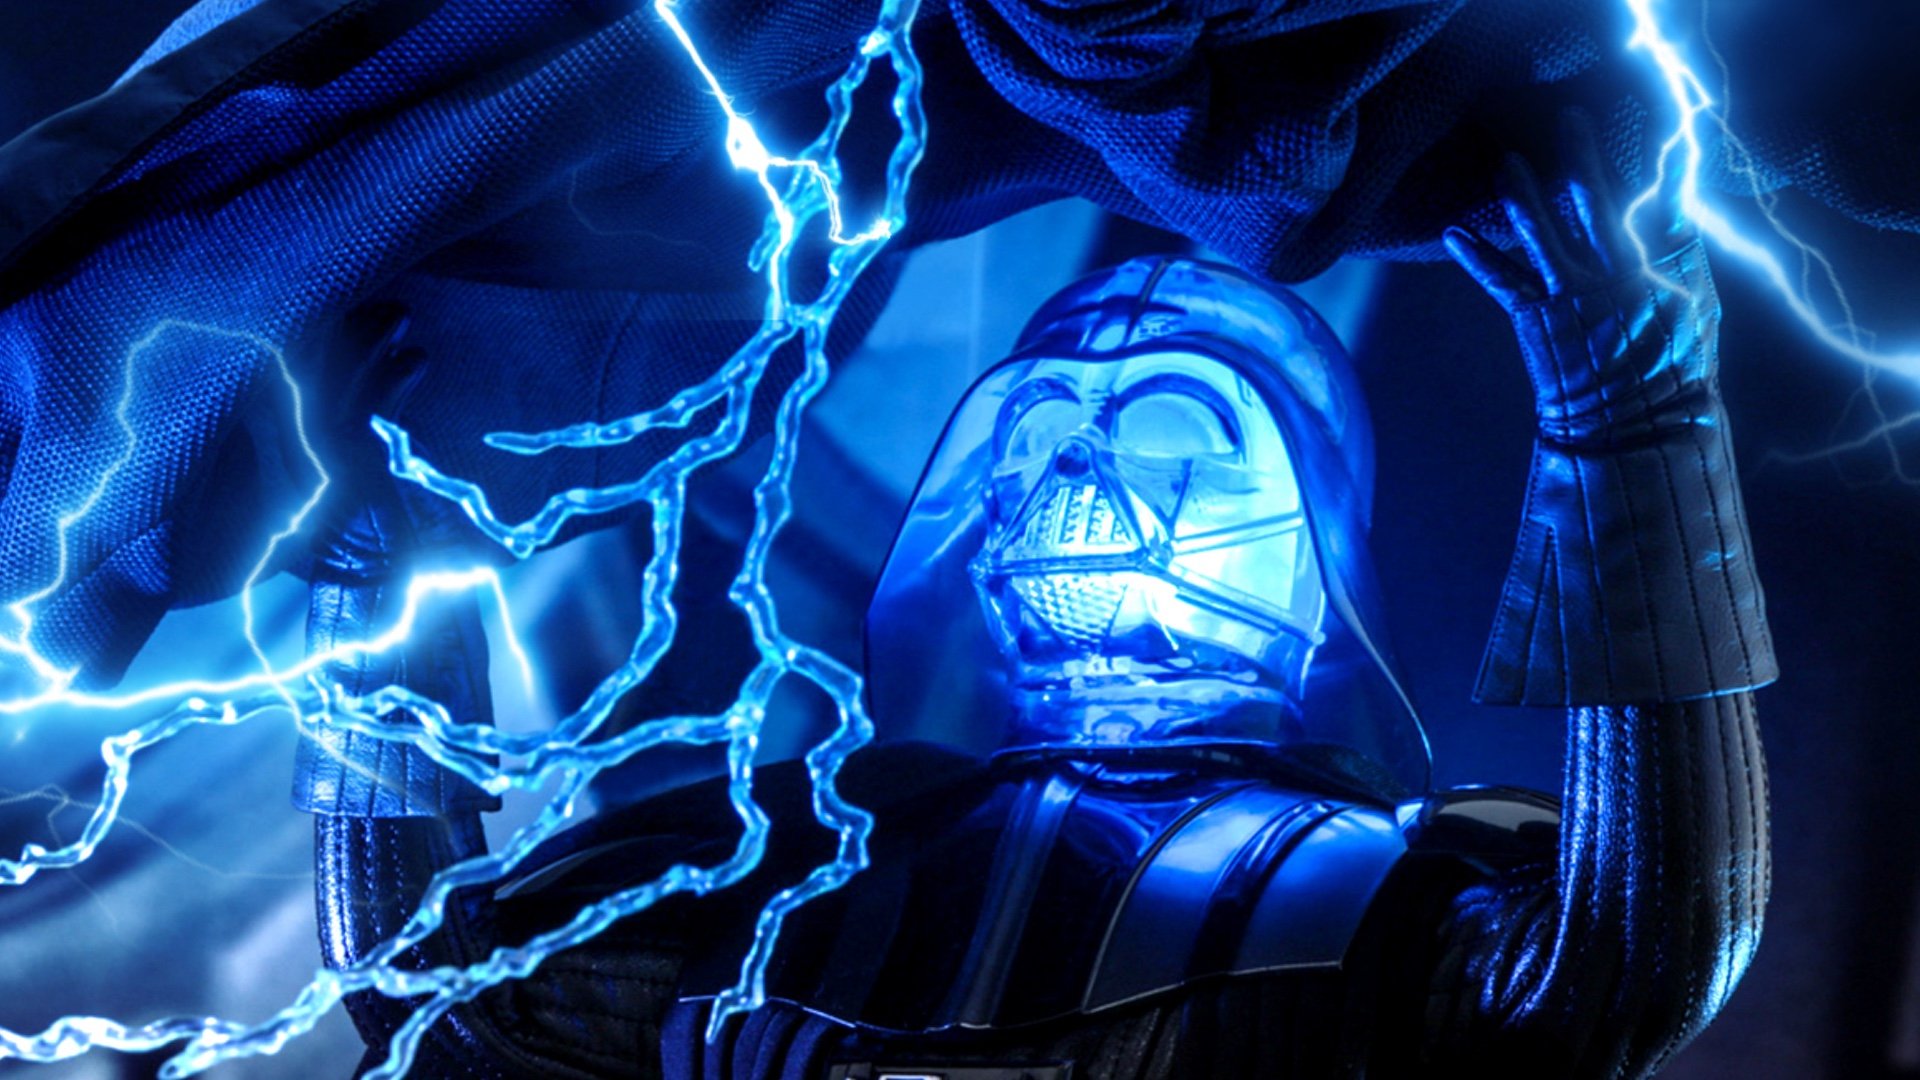 Hot Toys Reveals 40th STAR WARS: RETURN OF THE JEDI Darth Vader Action Figure — GeekTyrant